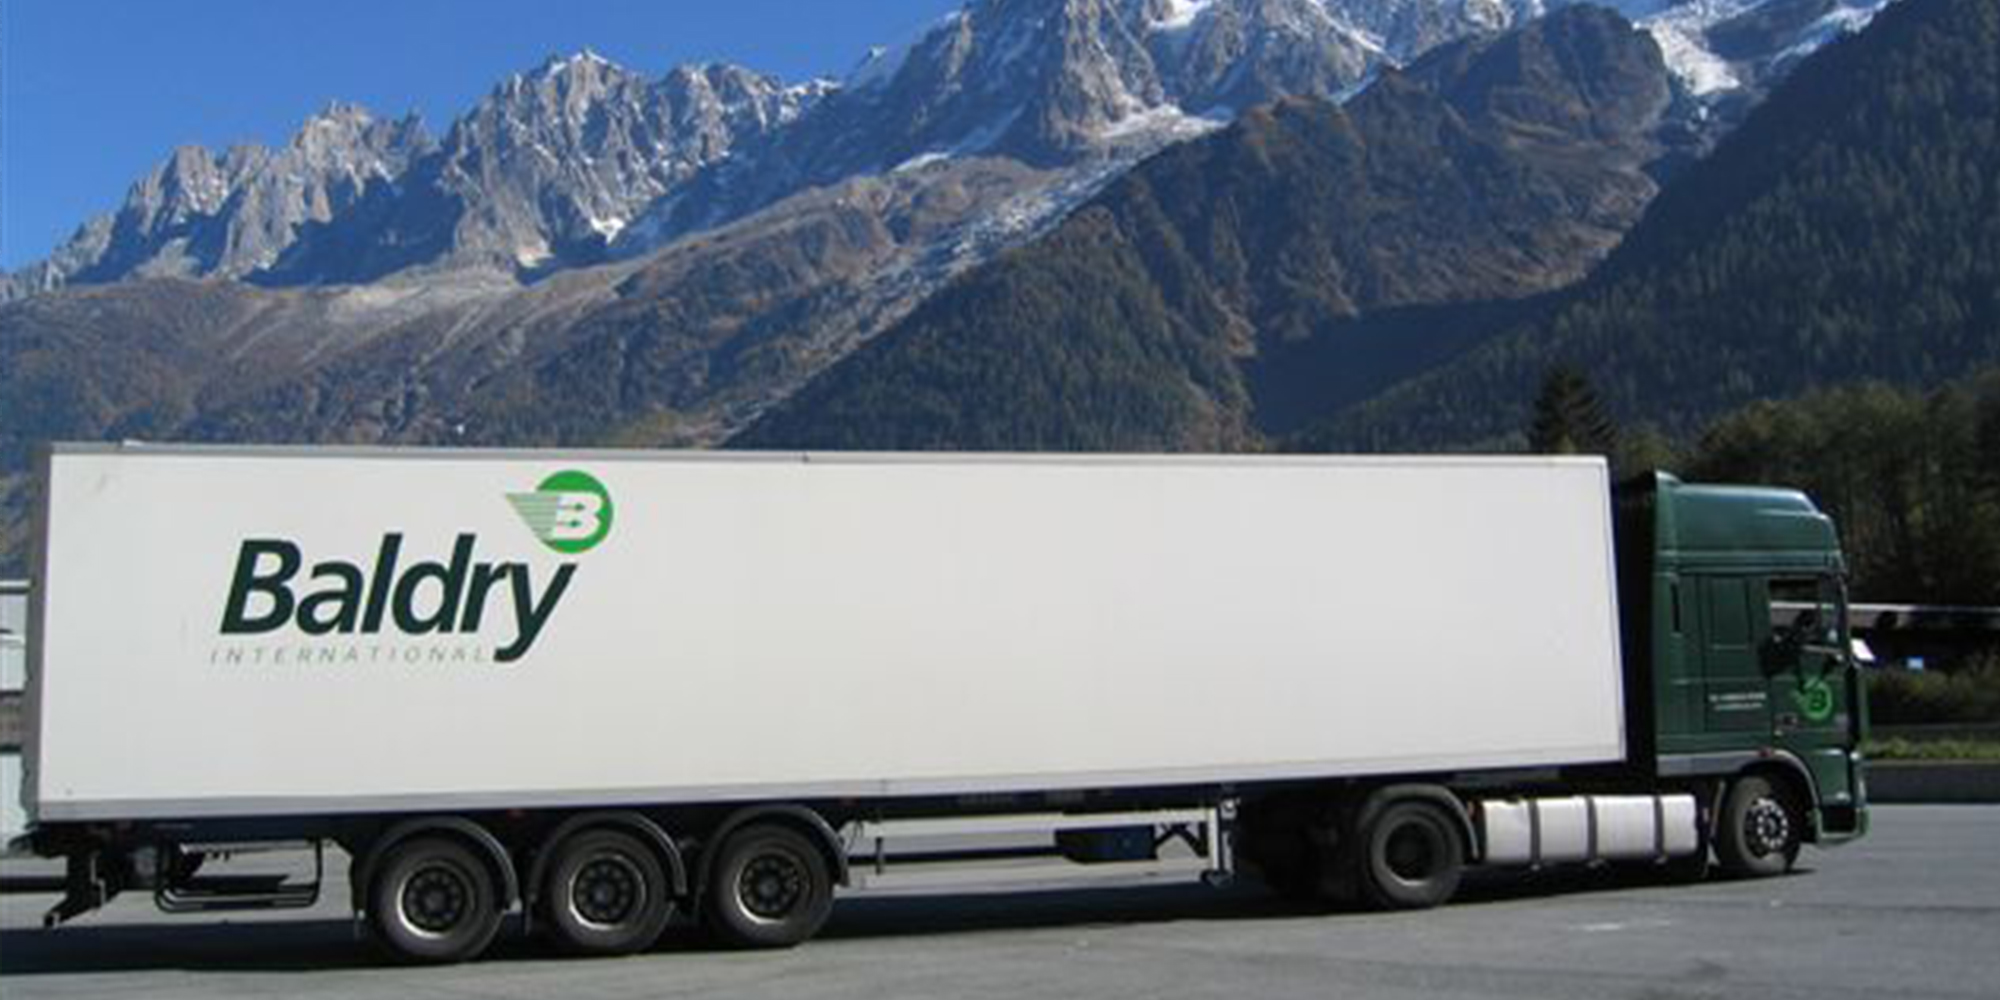 he-baldry-haulage-gallery-international-delivery-solutions-transport.jpg